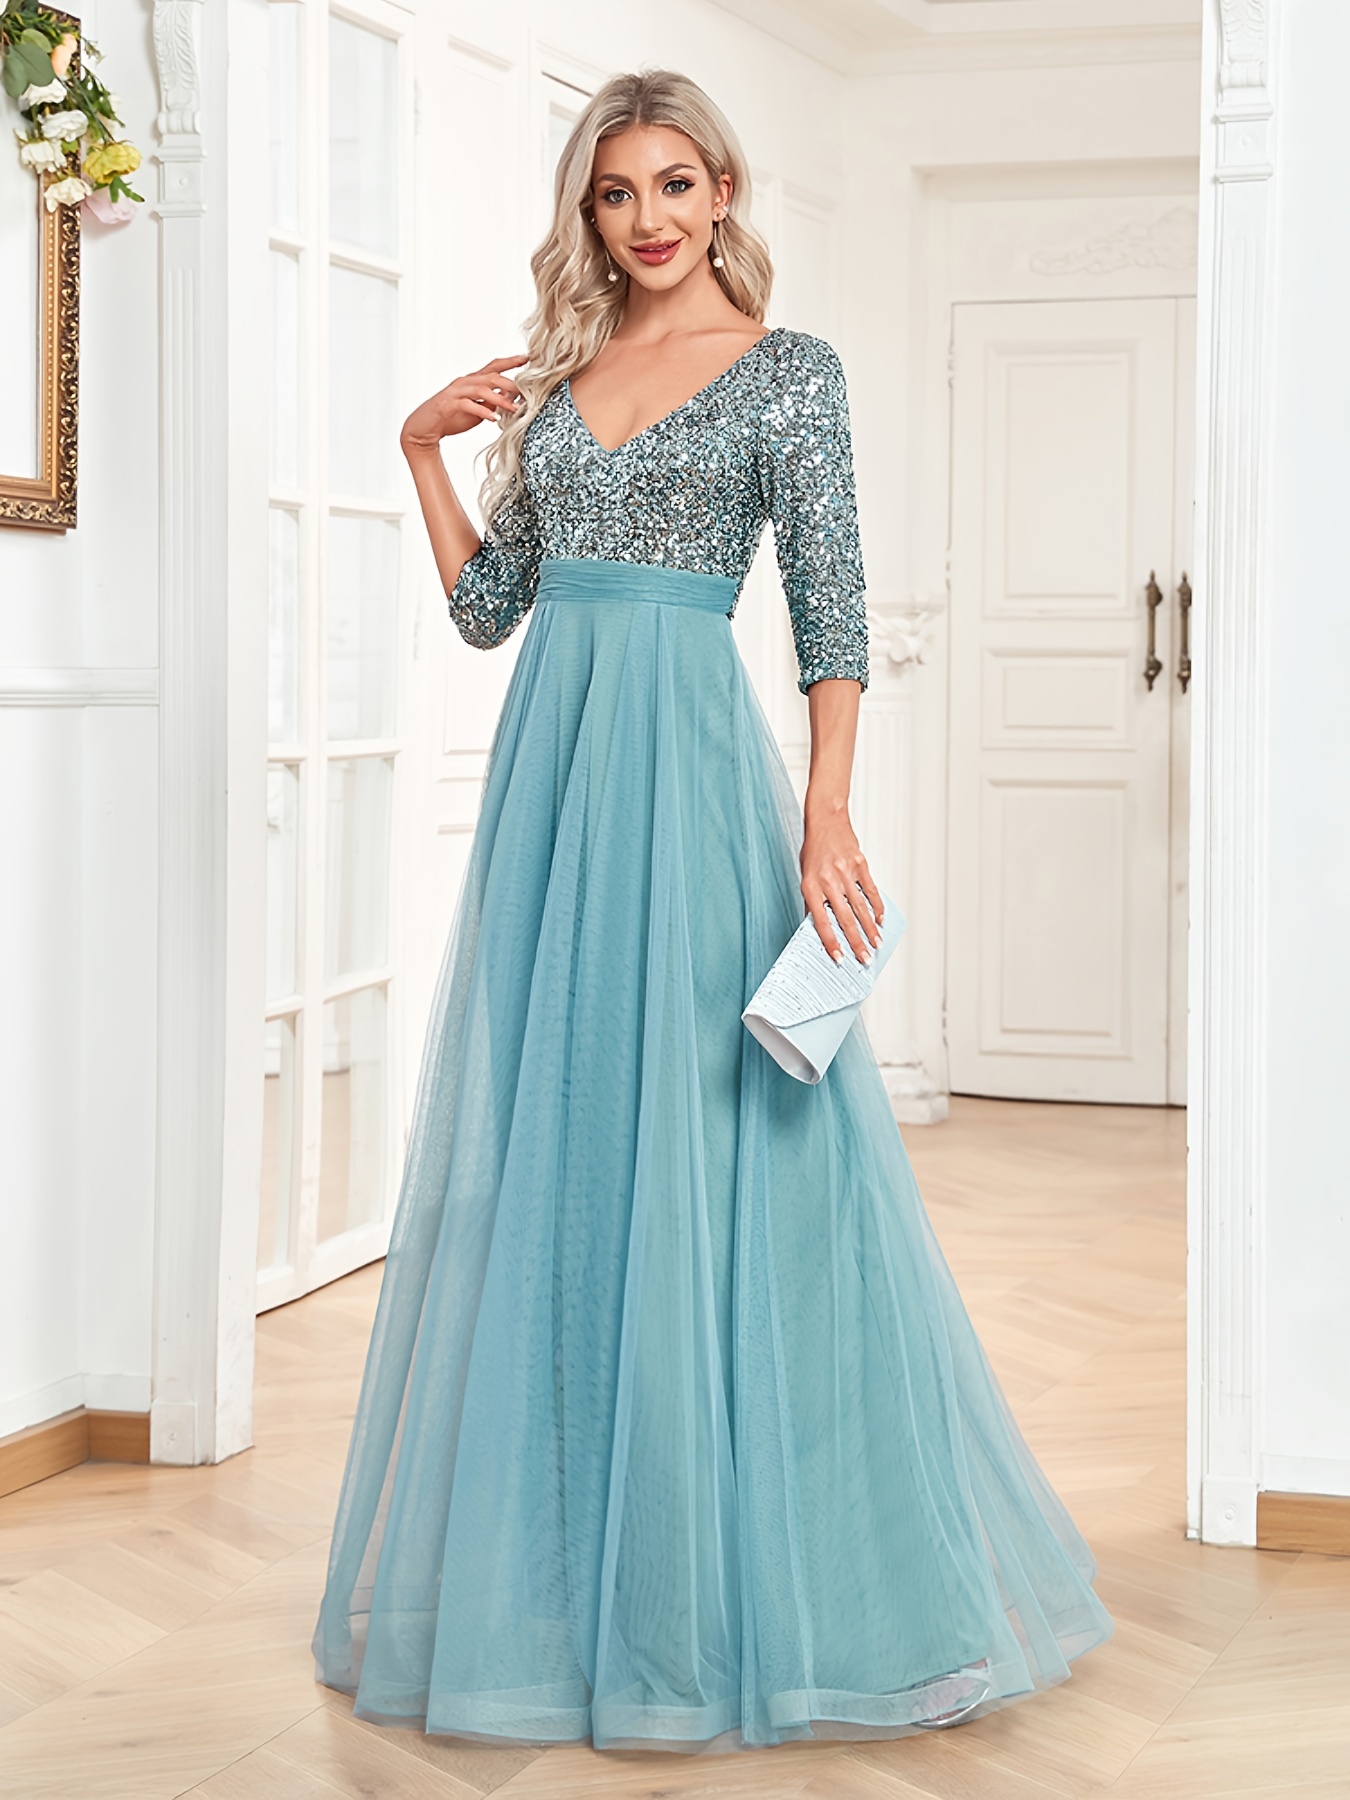 Half Sleeve Gowns Online Shopping for Women at Low Prices